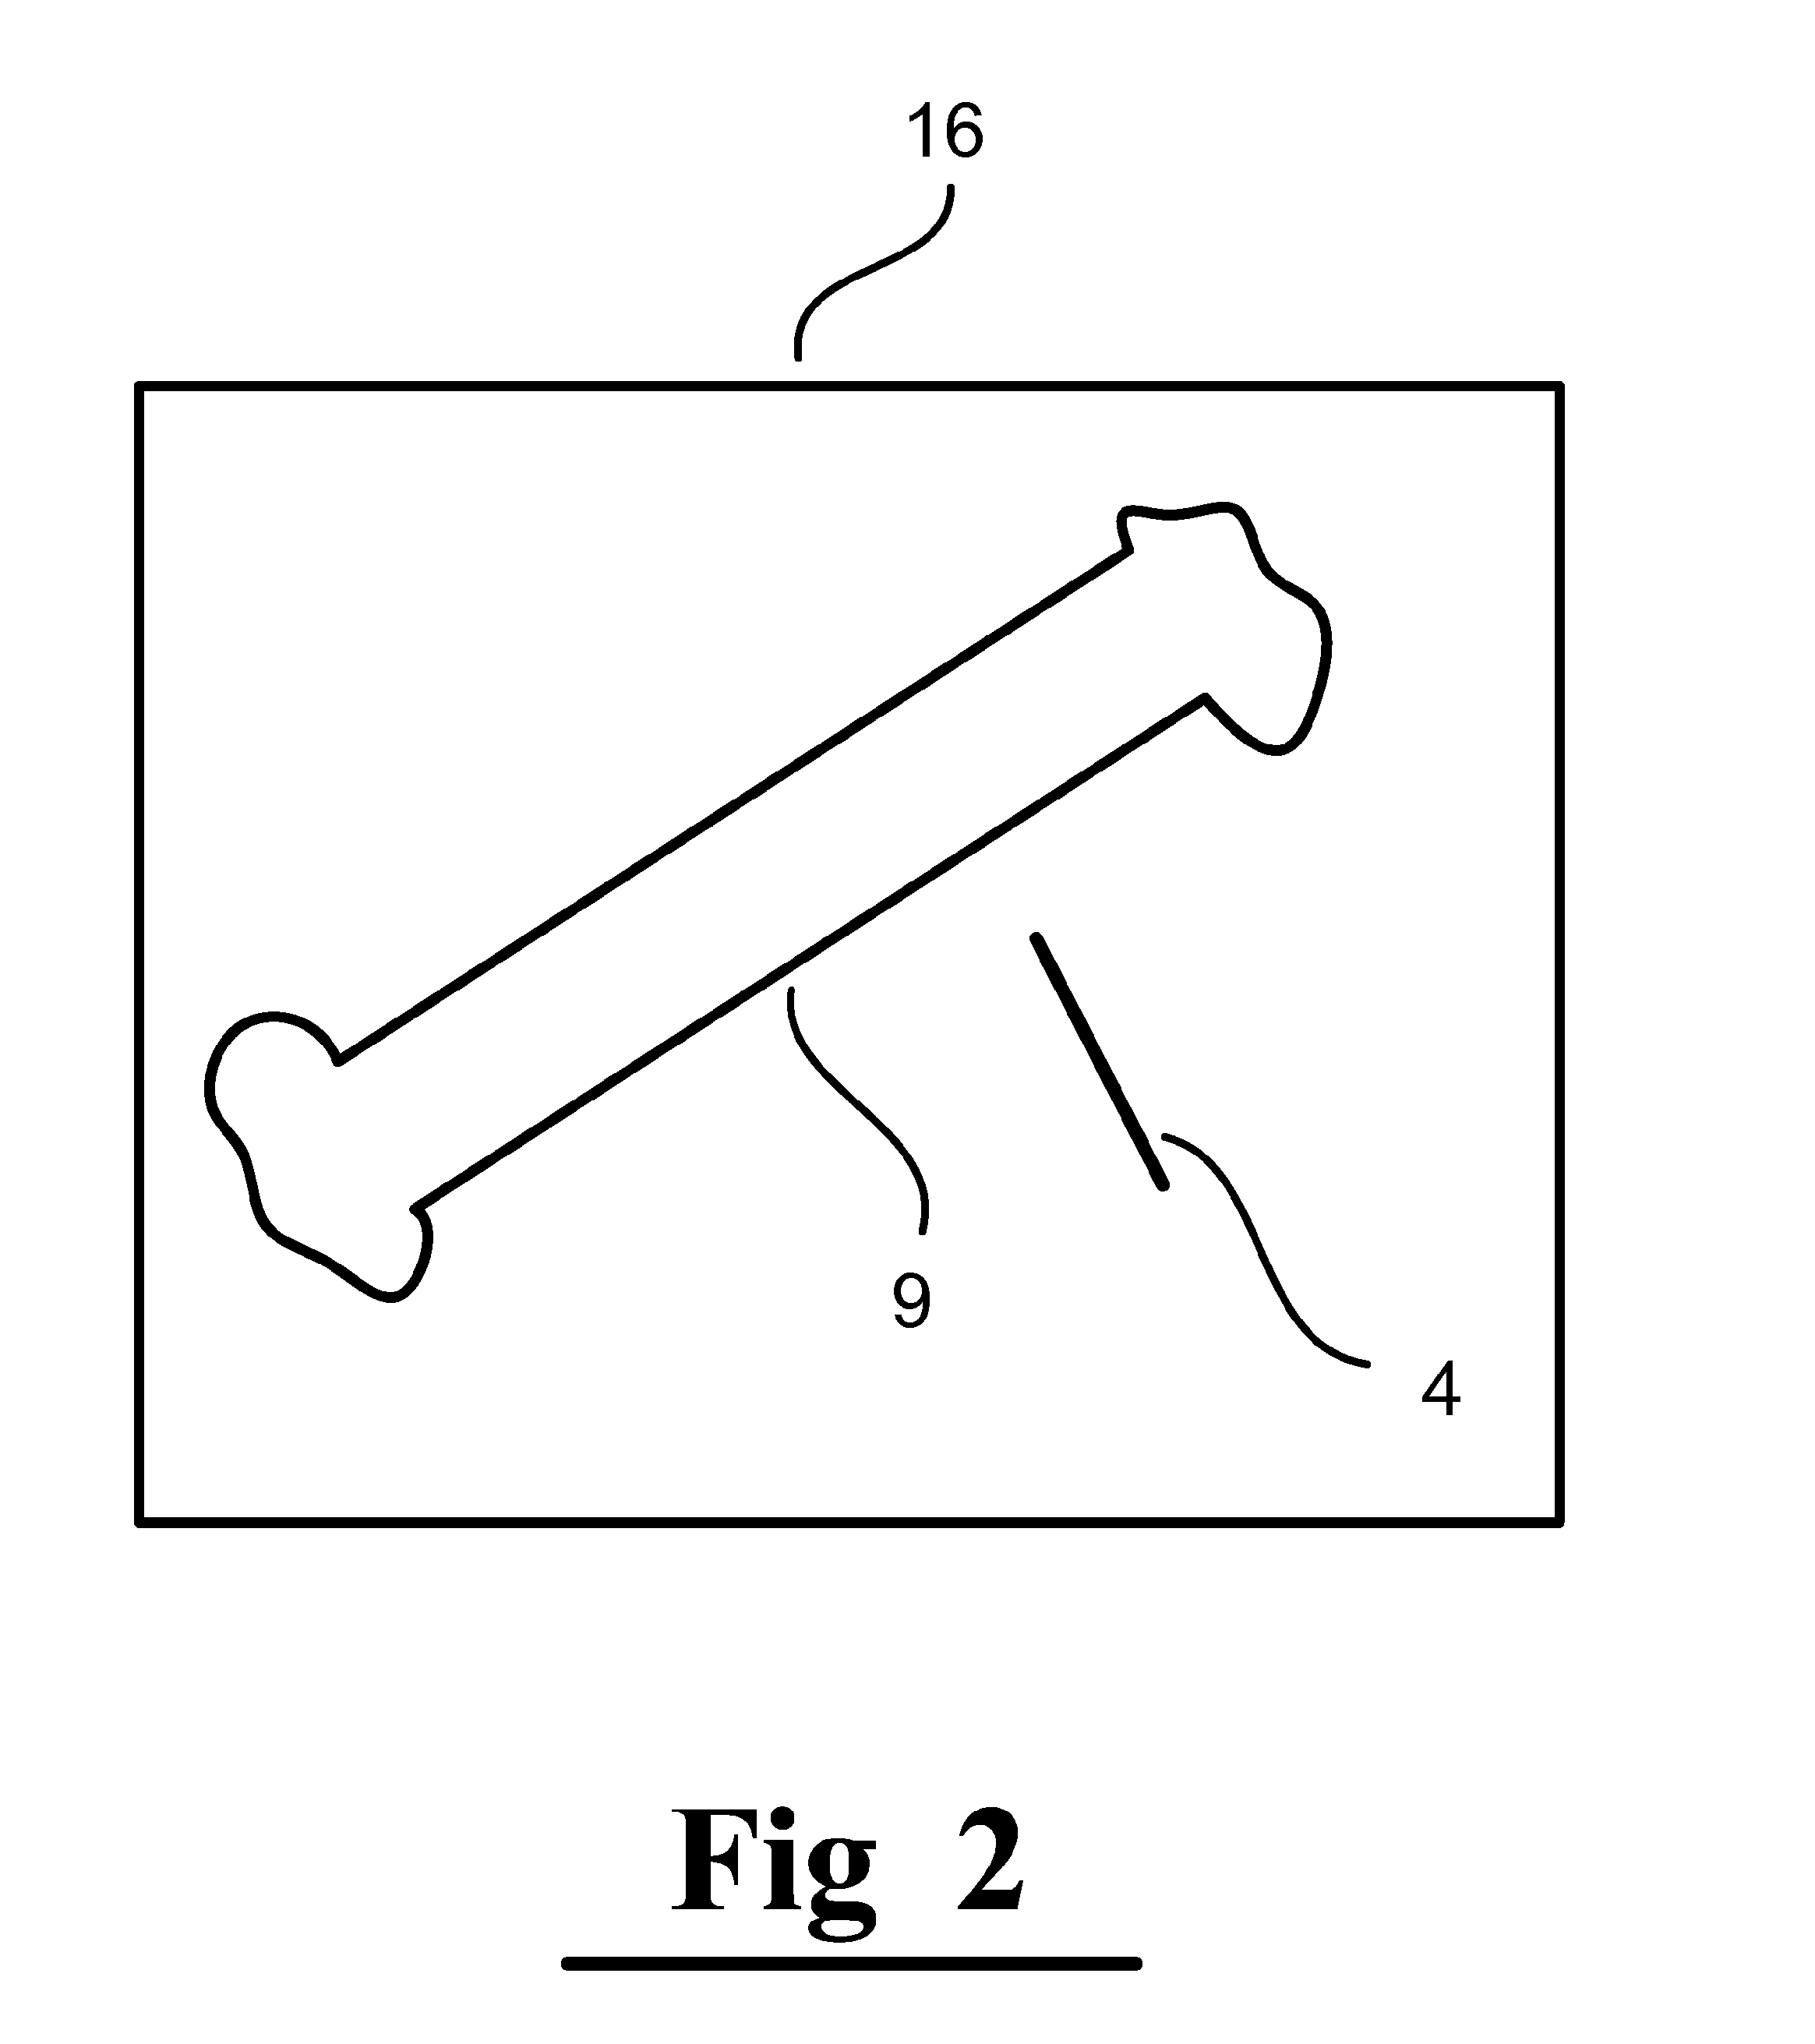 Methods, Devices, Systems, Circuits and Associated Computer Executable Code for Detecting and Predicting the Position, Orientation and Trajectory of Surgical Tools